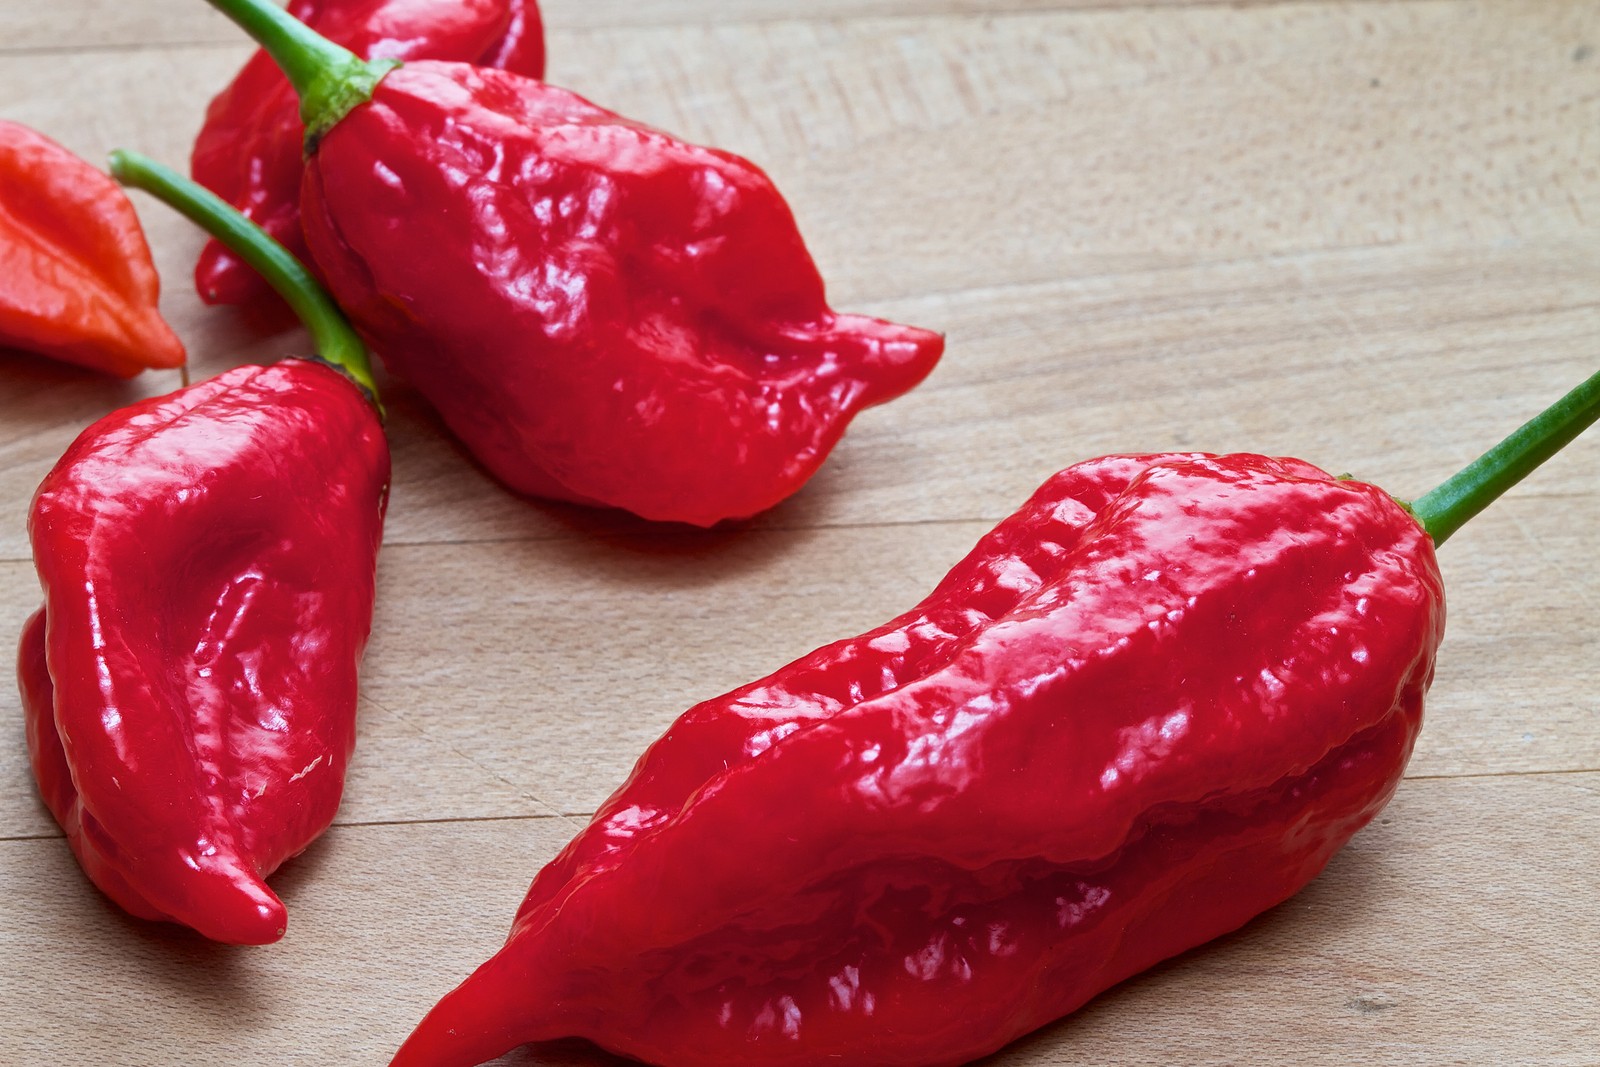 The Health Benefits of Jalapeños - Chilli No. 5 - The Sauce of Life